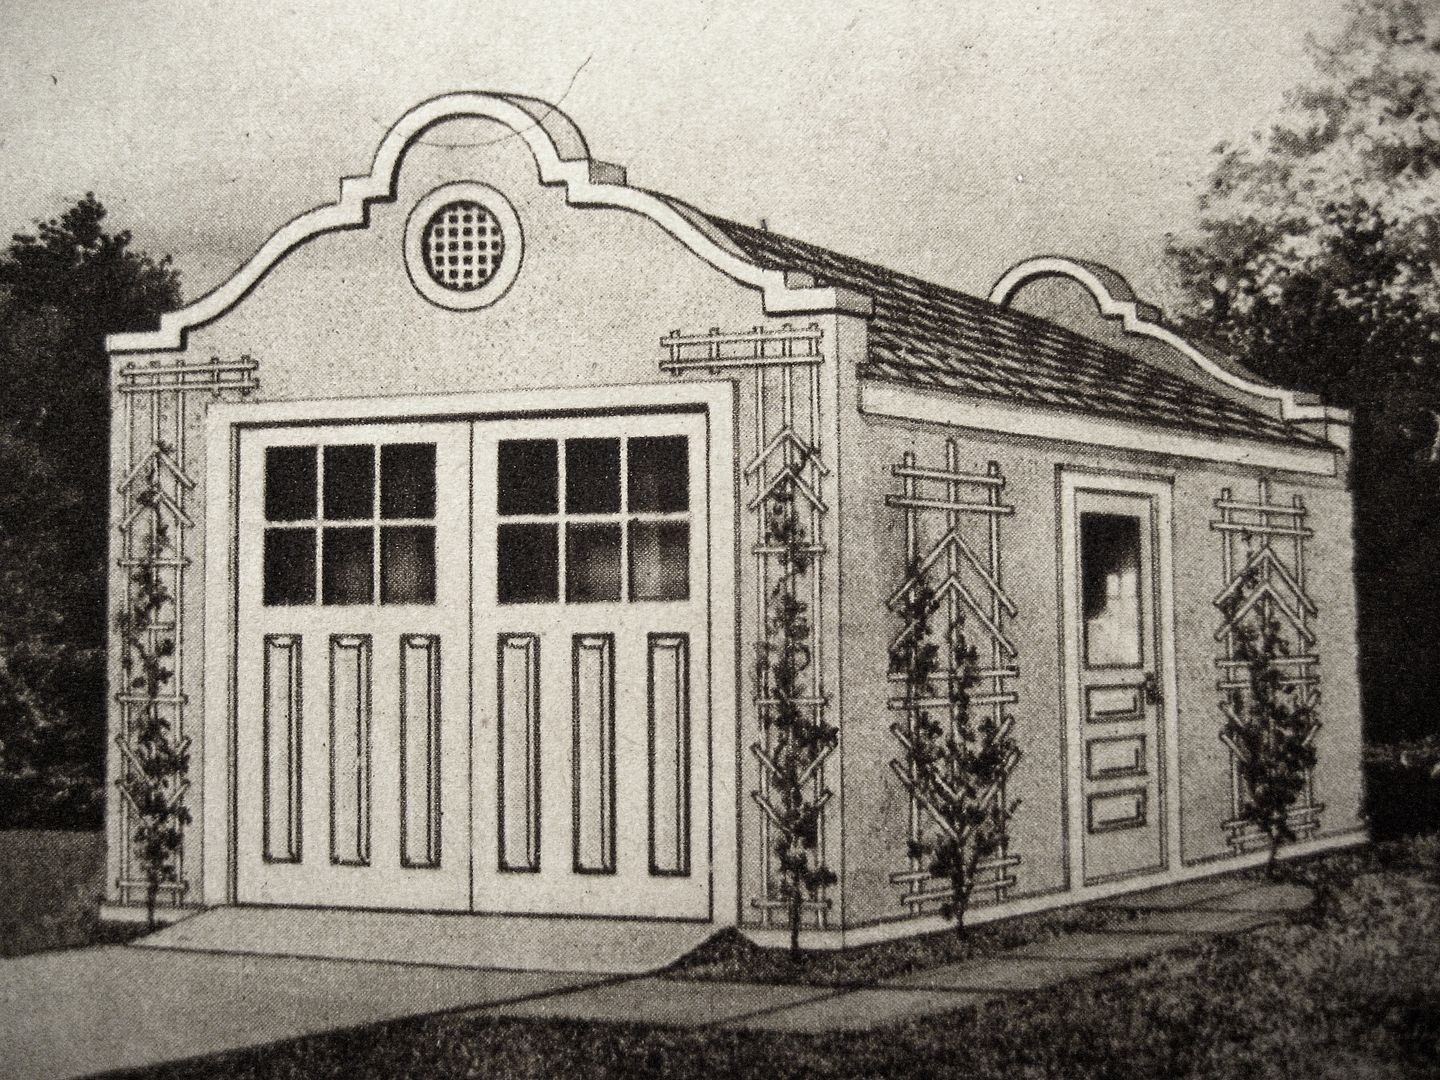 A matching Alhambra garage was offered in the late 1910s!